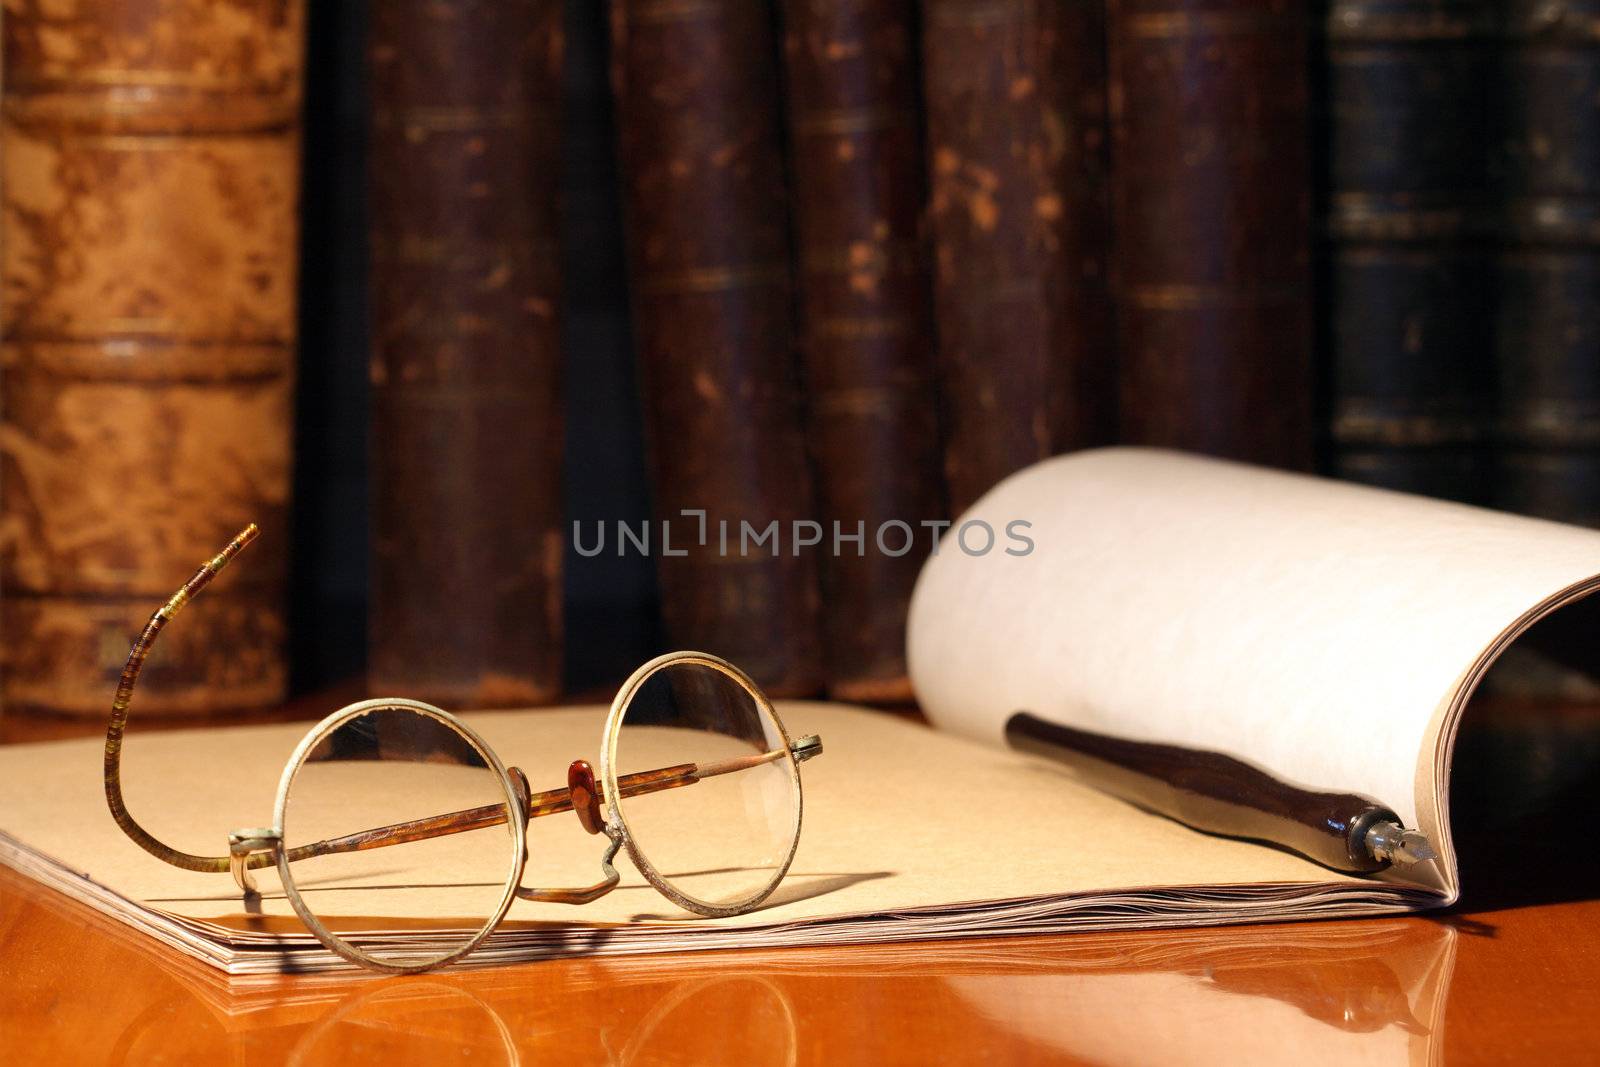 Vintage still life with old spectacles, paper notebook and pen on background with books